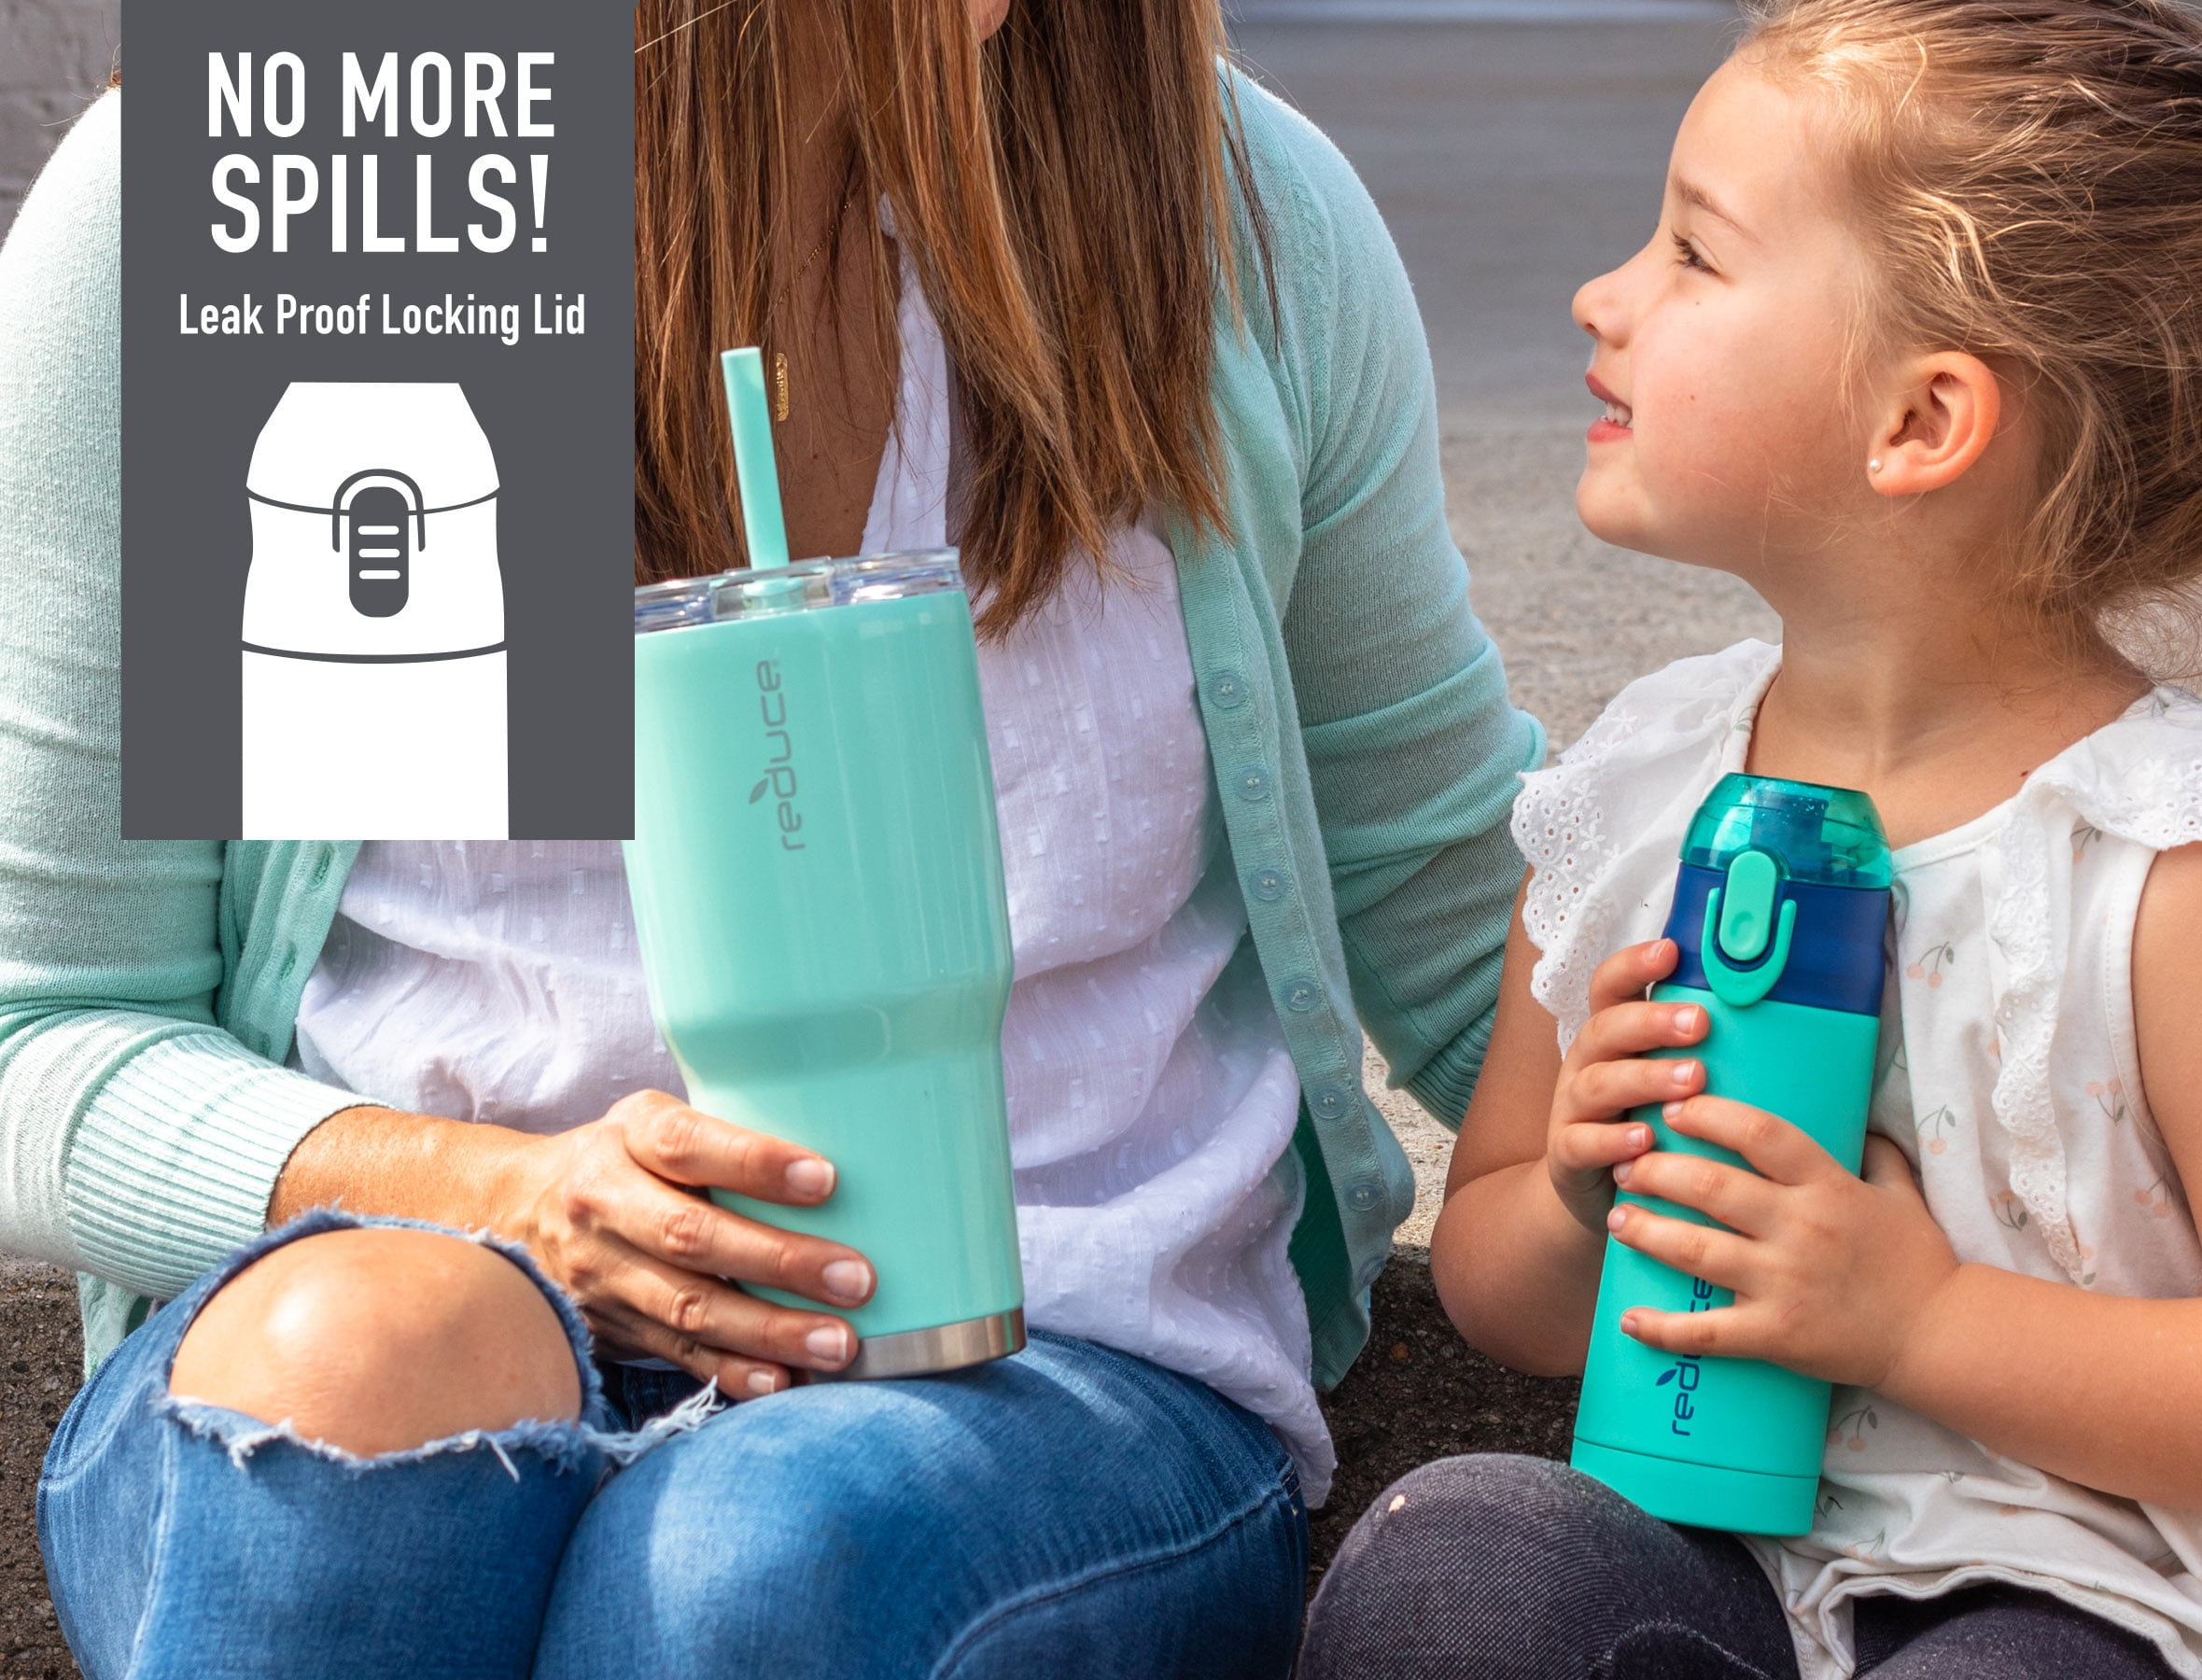 Reduce Stainless Steel Insulated Kids FROSTEE Water Bottle, 13oz Green BPA  free